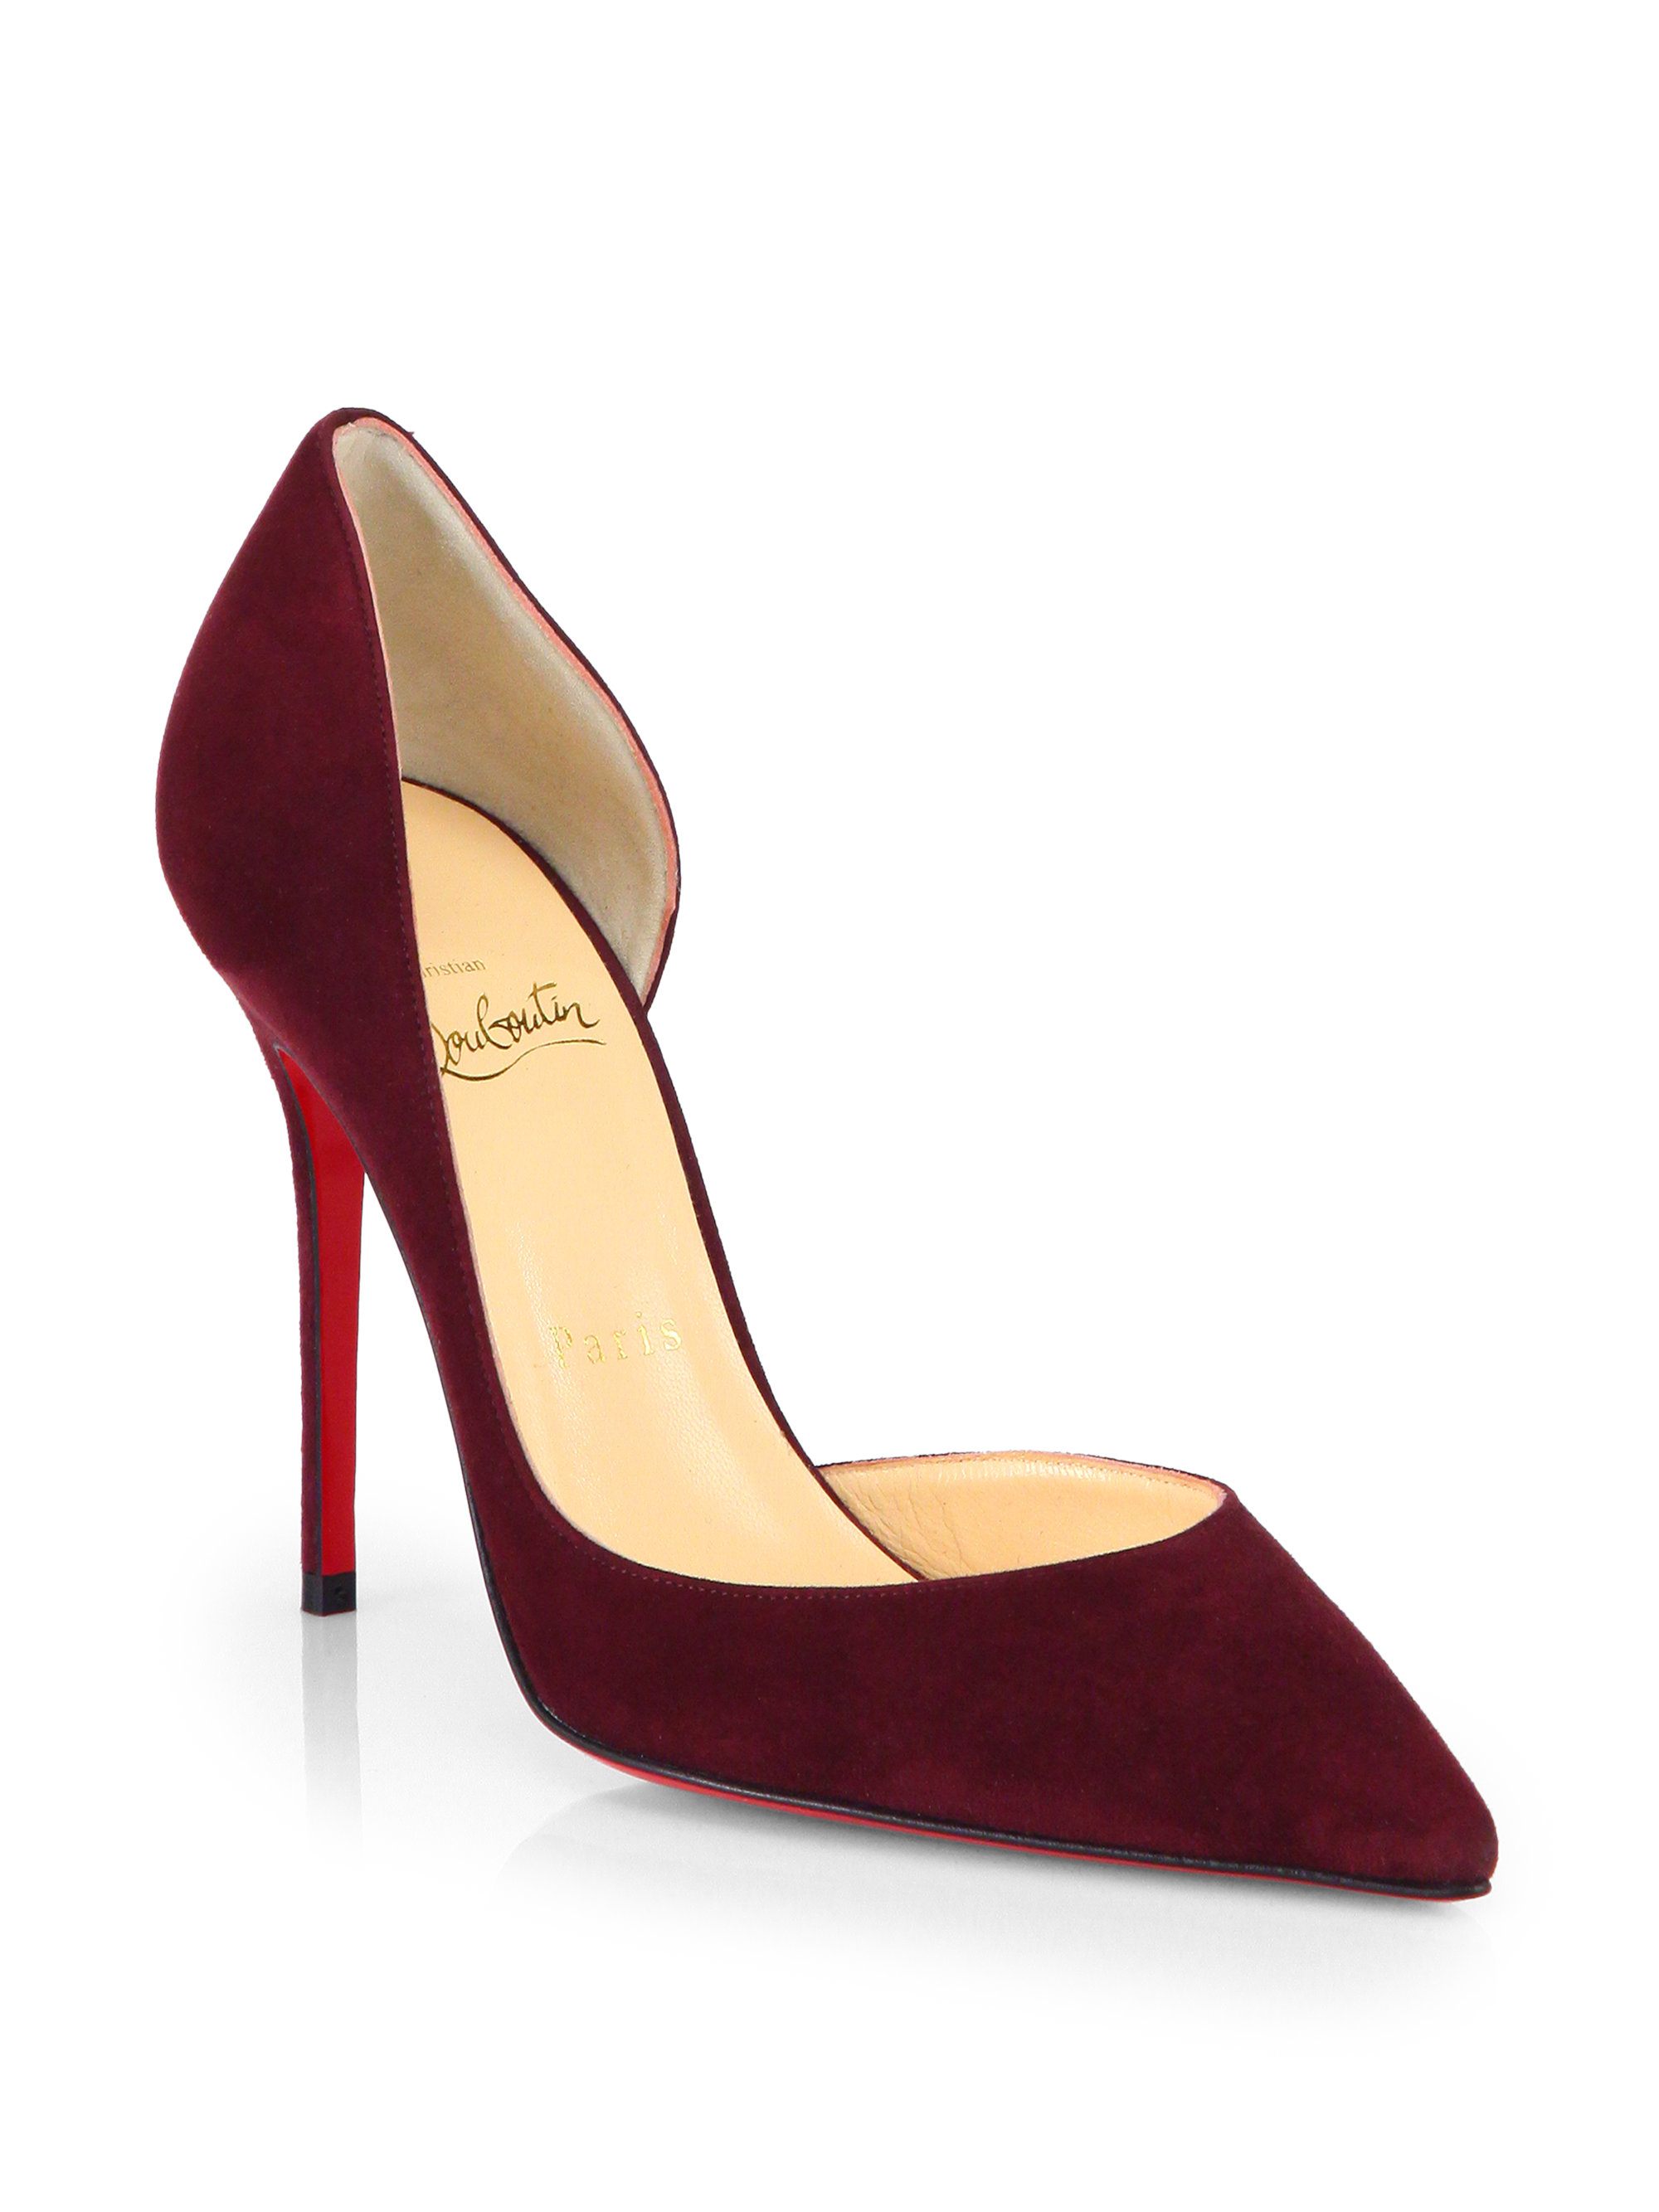 Christian Louboutin Iriza 100 Suede Dorsay Pumps in Red (BURGUNDY) | Lyst